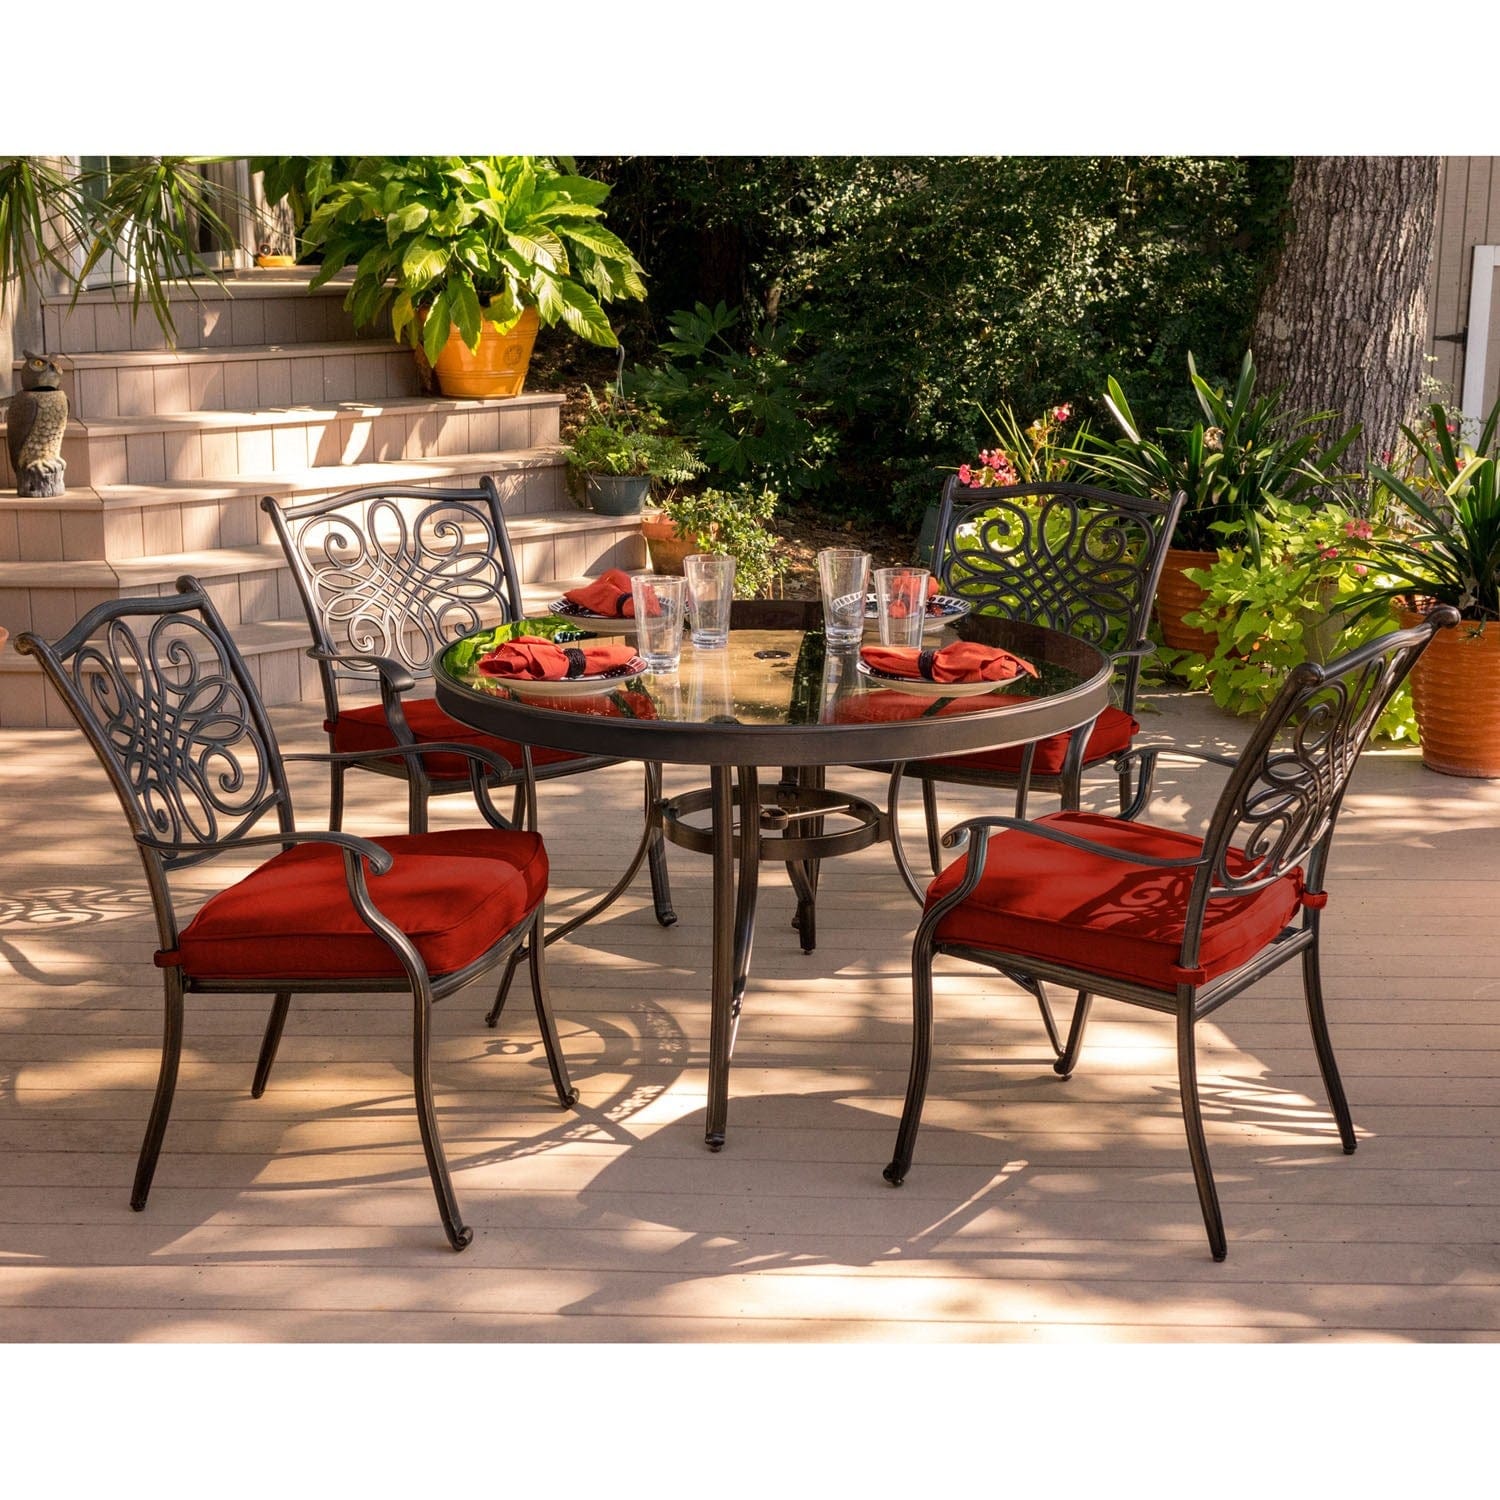 Hanover Outdoor Dining Set Hanover Traditions 5-Piece Aluminum Frame Dining Set in Red with 48 In. Glass-top Table | TRADDN5PCG-RED